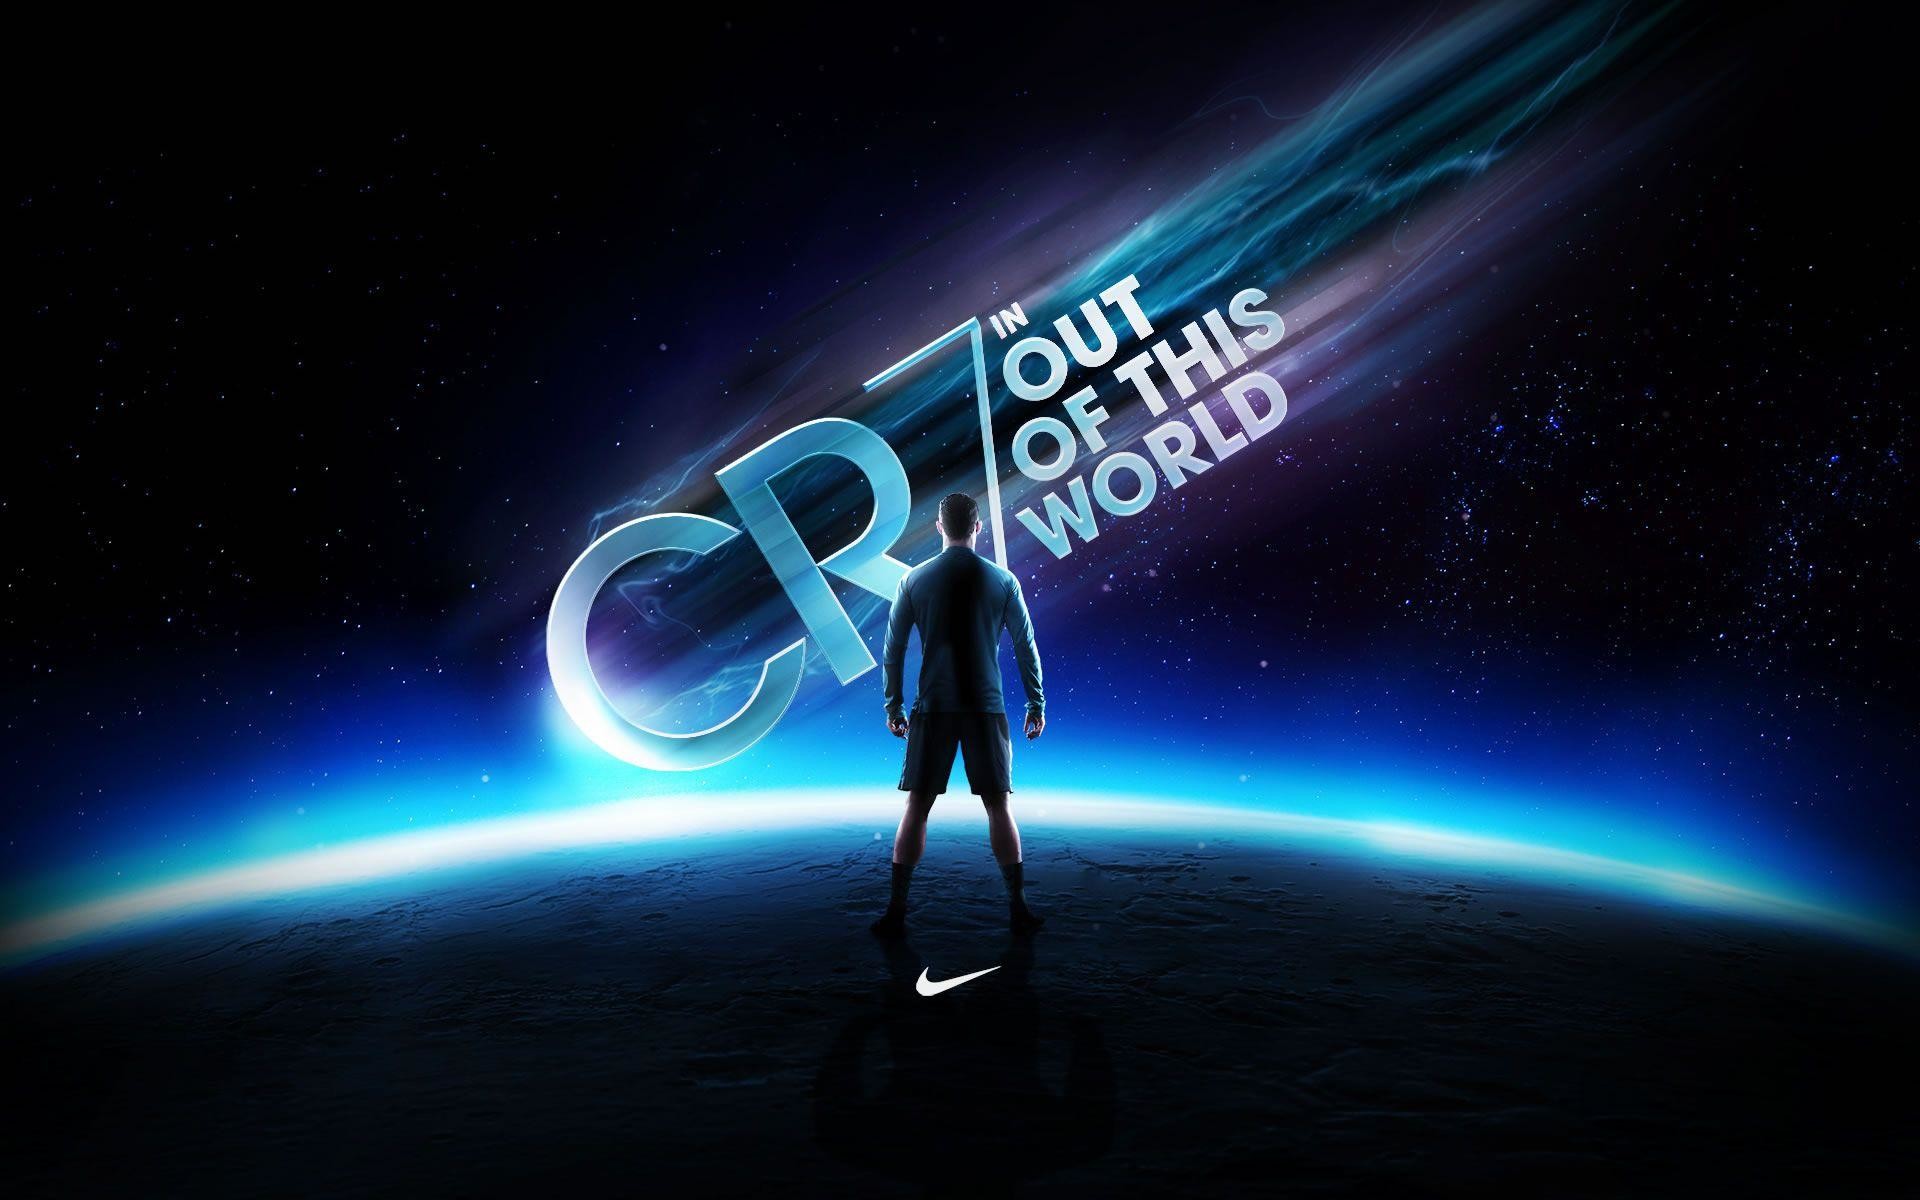 1920x1200 CR7: "Out of this world" Nike Wallpaper - Cristiano Ronaldo Wallpapers